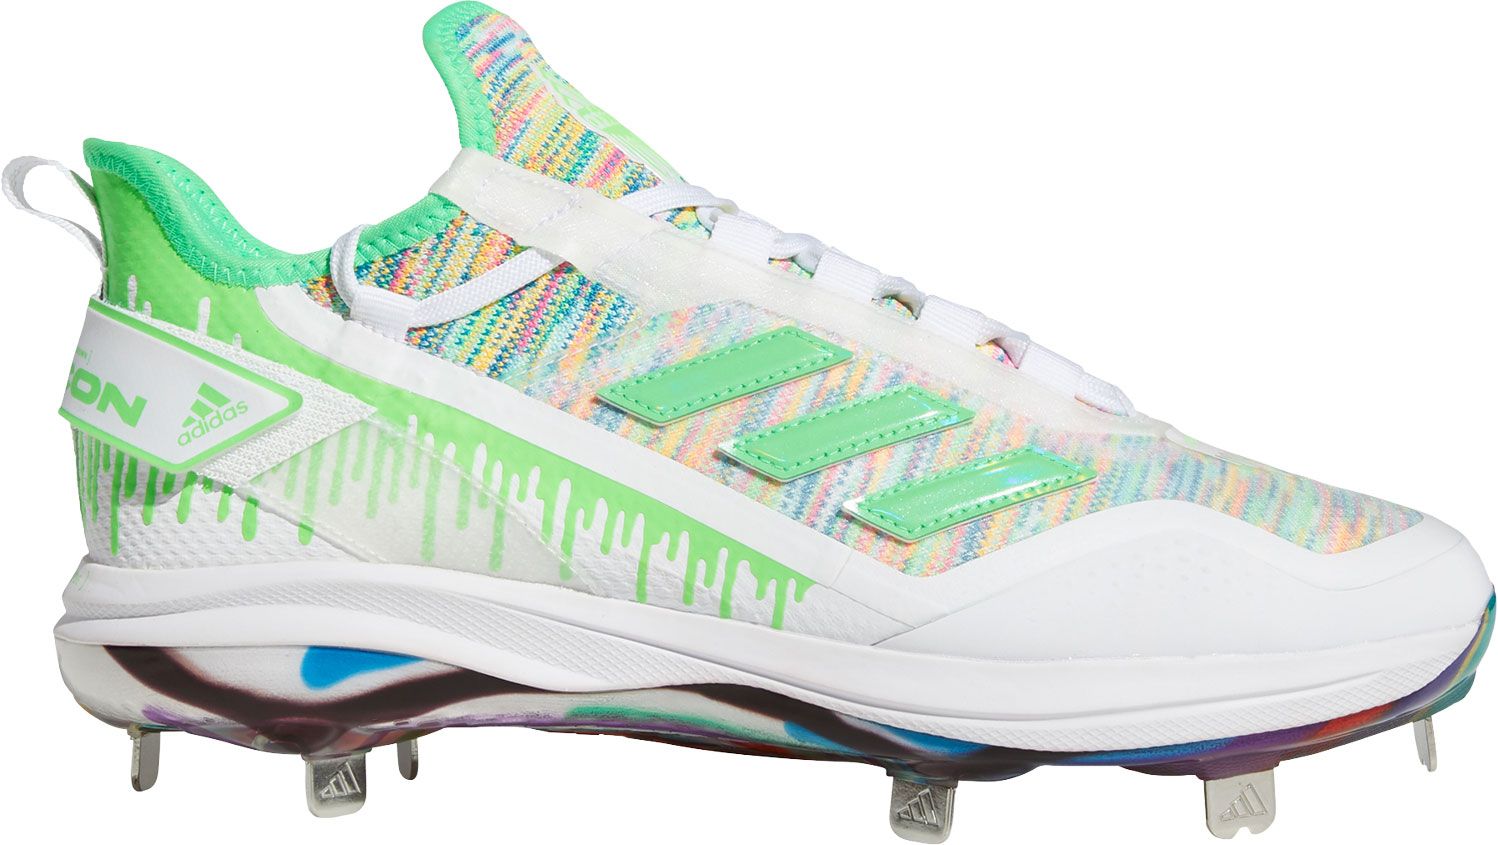 Adidas Men's Icon Boost Dripped-Out Metal Baseball Cleats